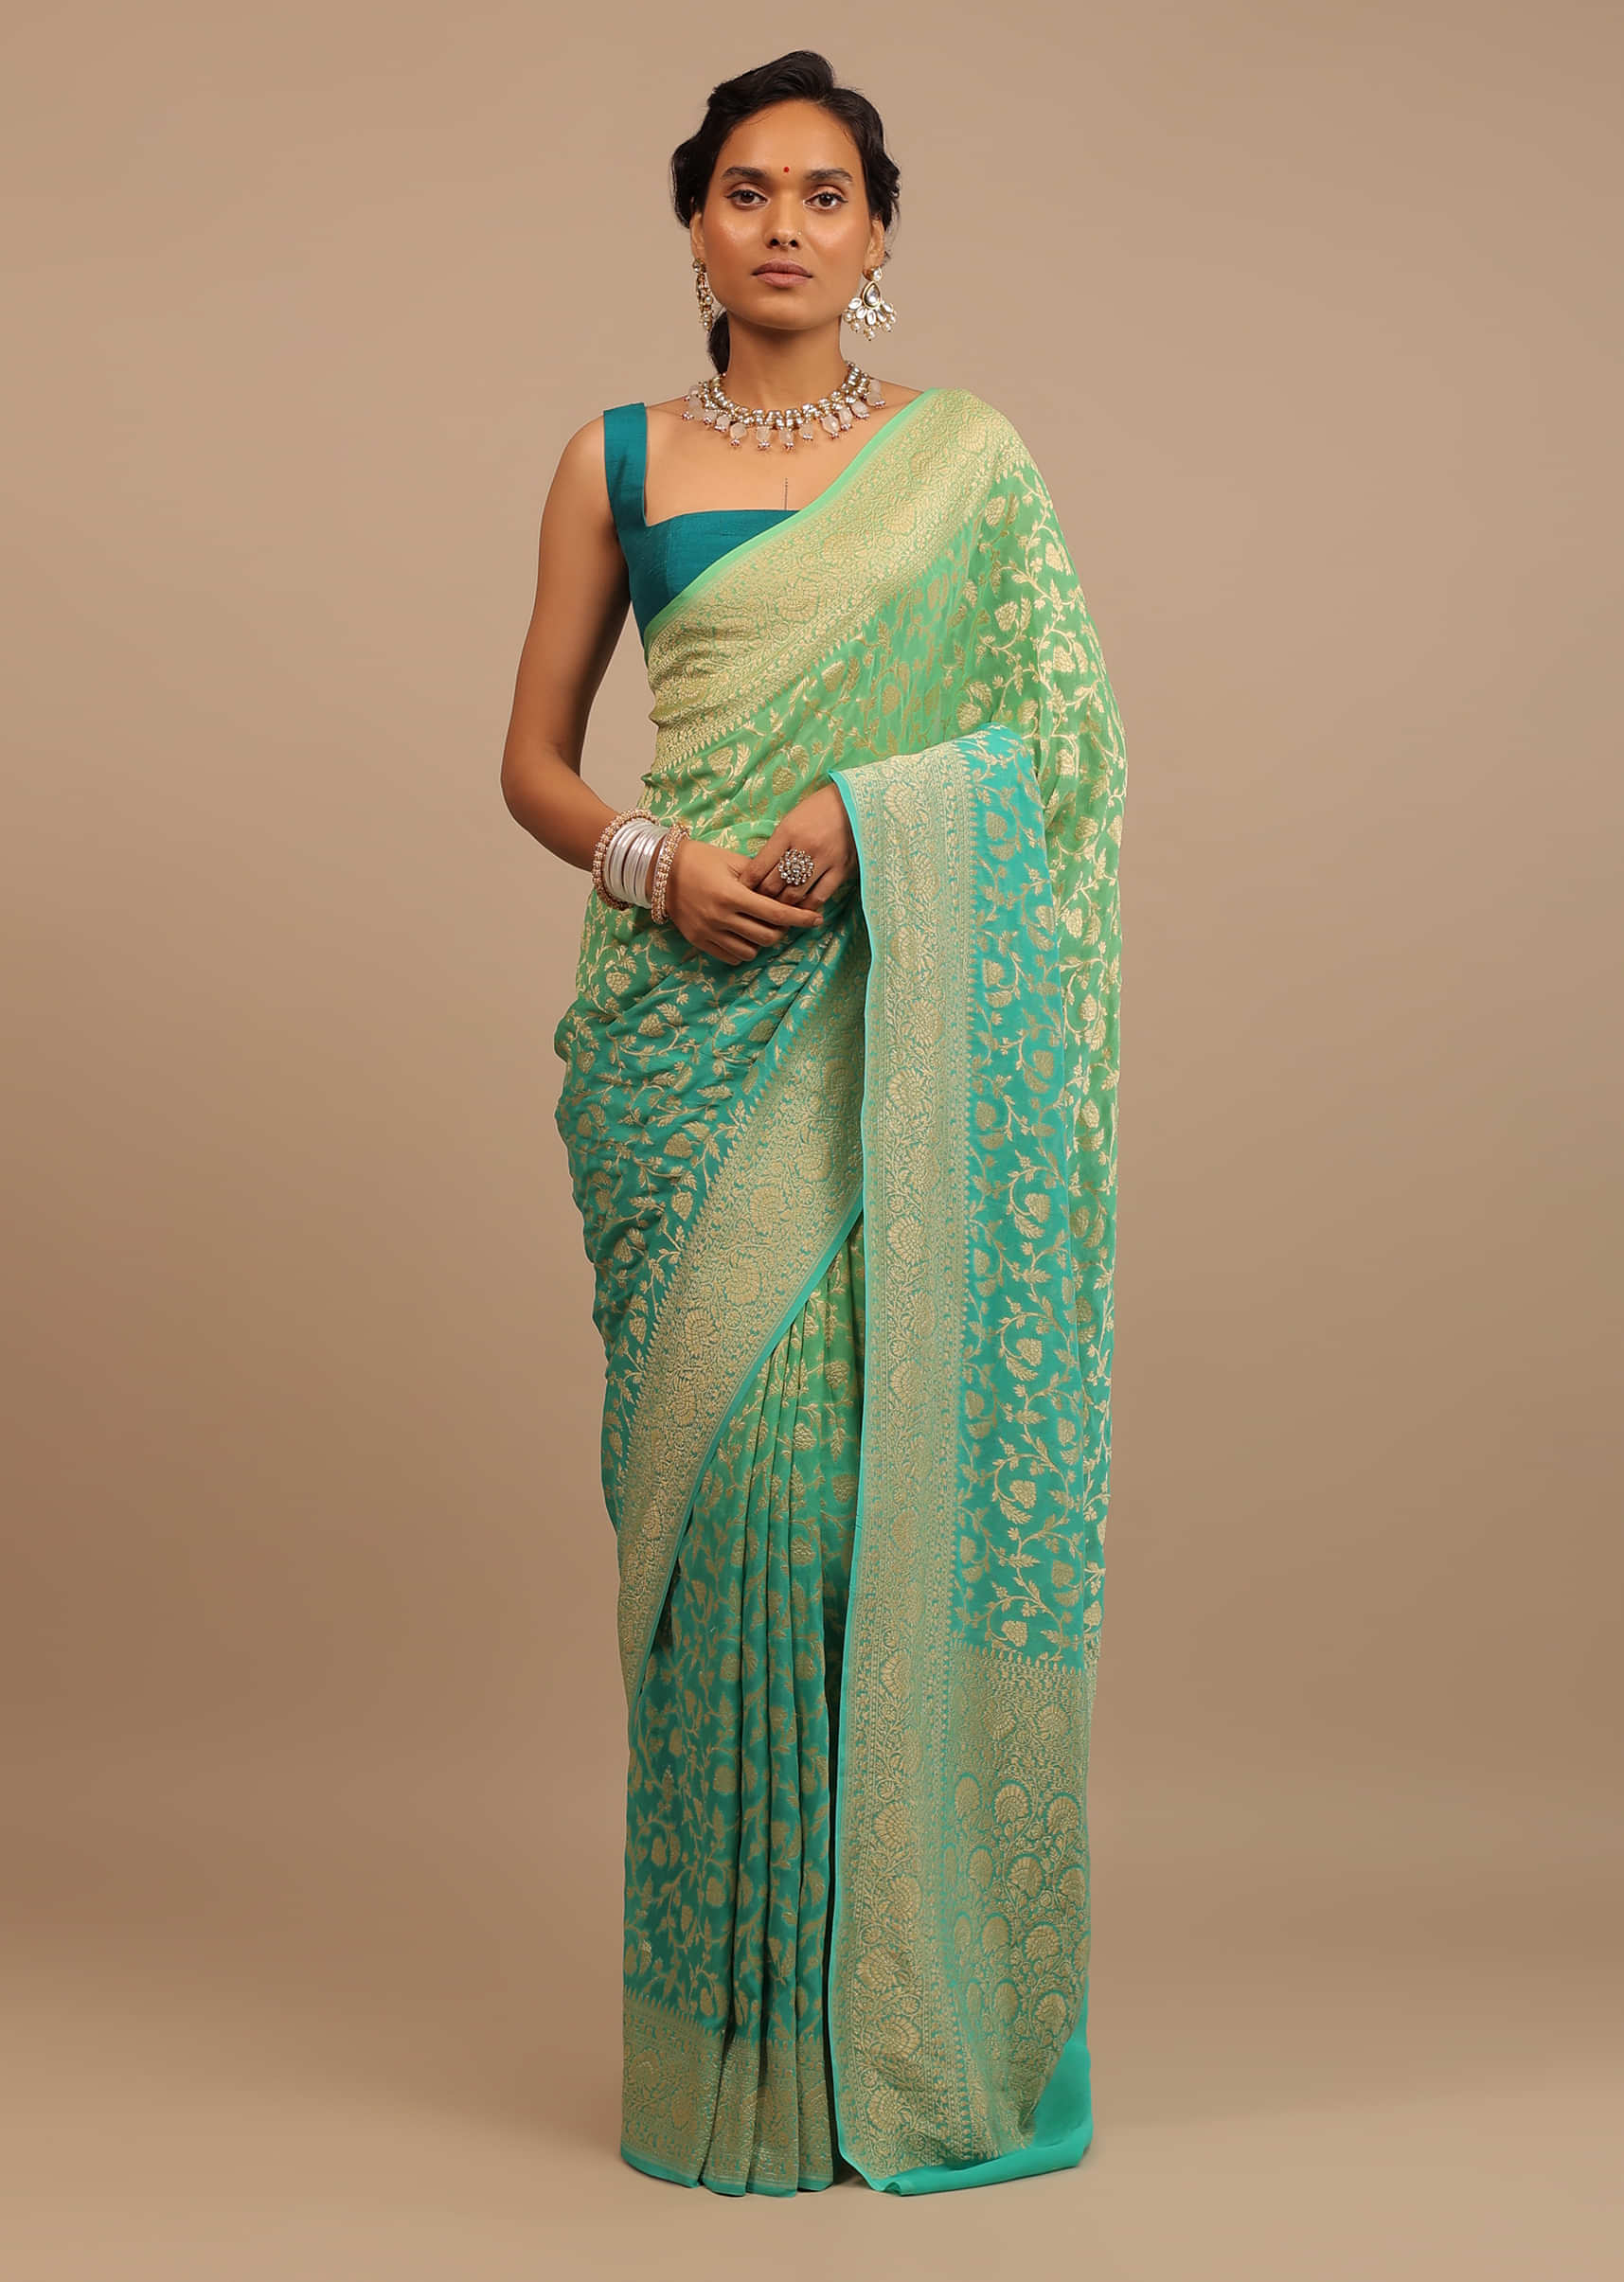 Jade Green Saree Made In Georgette And Beautified With Golden Jaal In A Floral Pattern